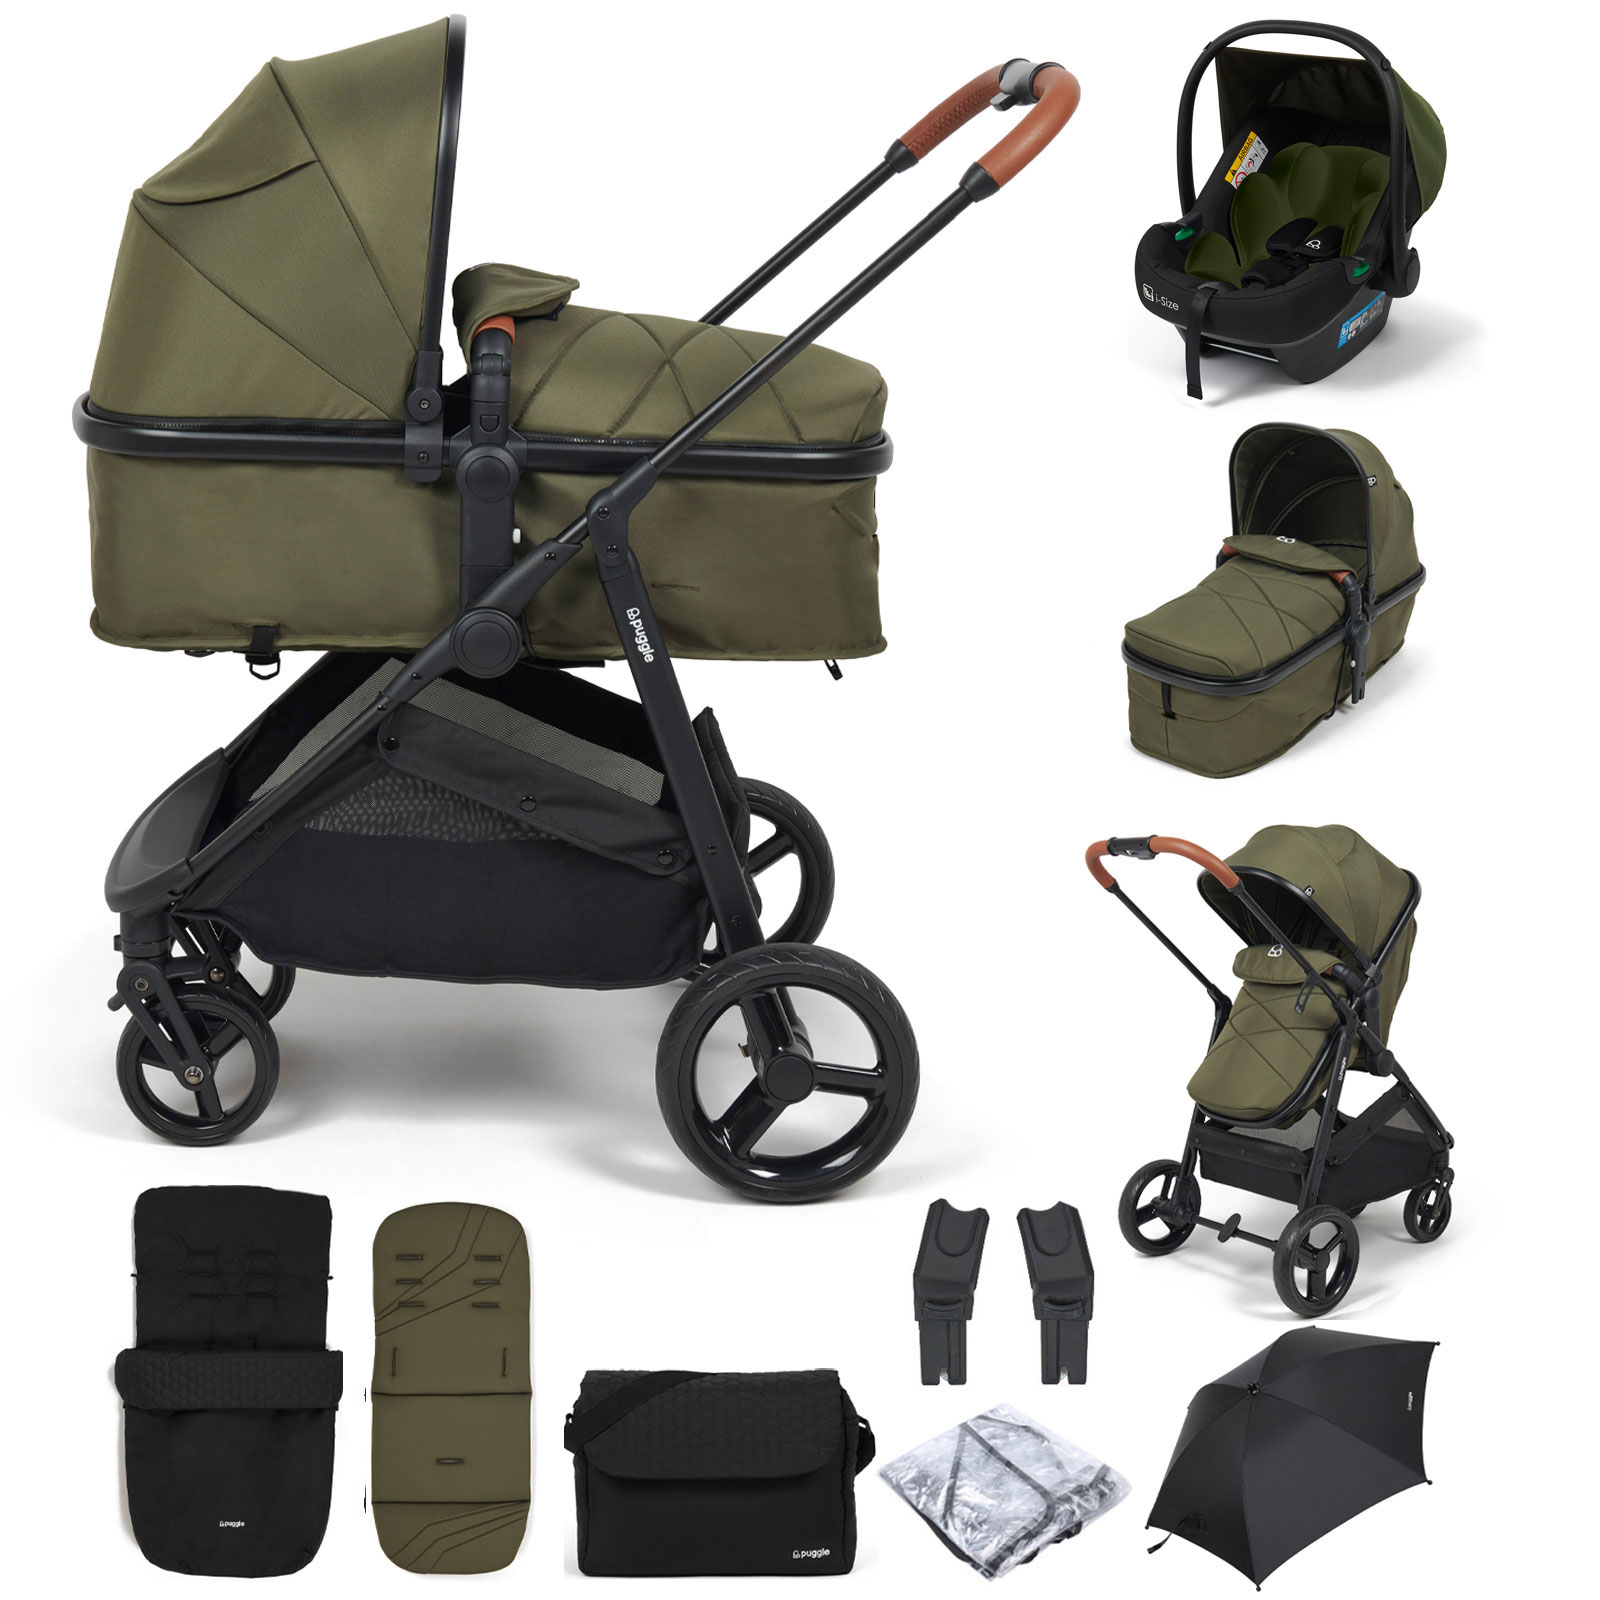 Puggle Monaco XT 2in1 i-Size Pram Pushchair Travel System with Parasol, Footmuff & Bag - Forest Green